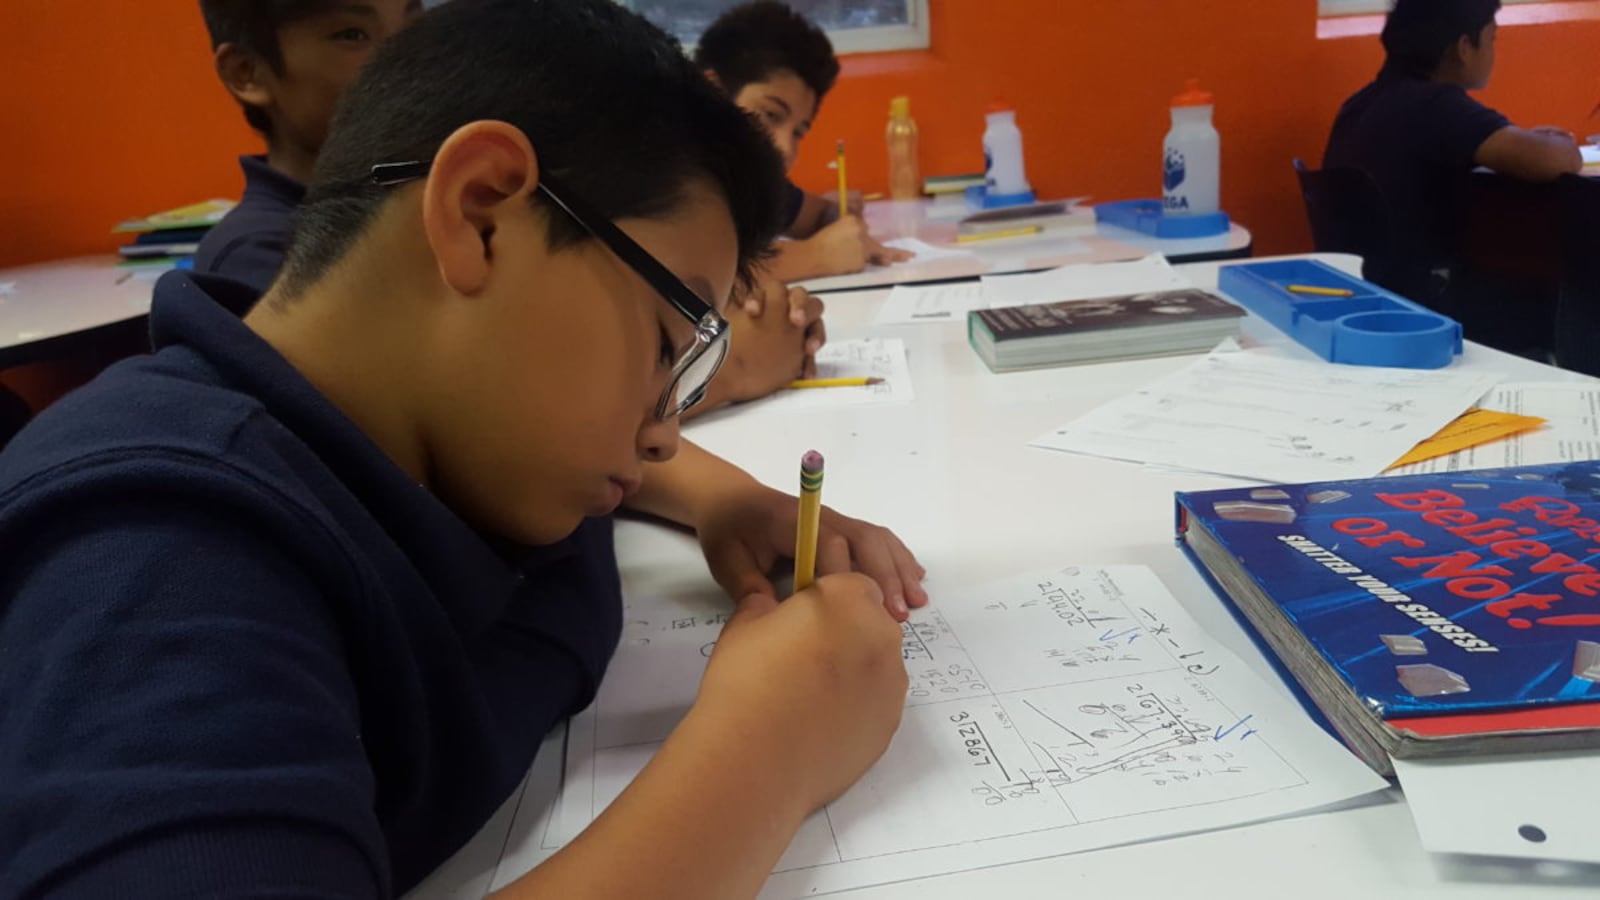 Sixth grade students work on math problems during a September 2018 class at Vega Collegiate Academy in Aurora.